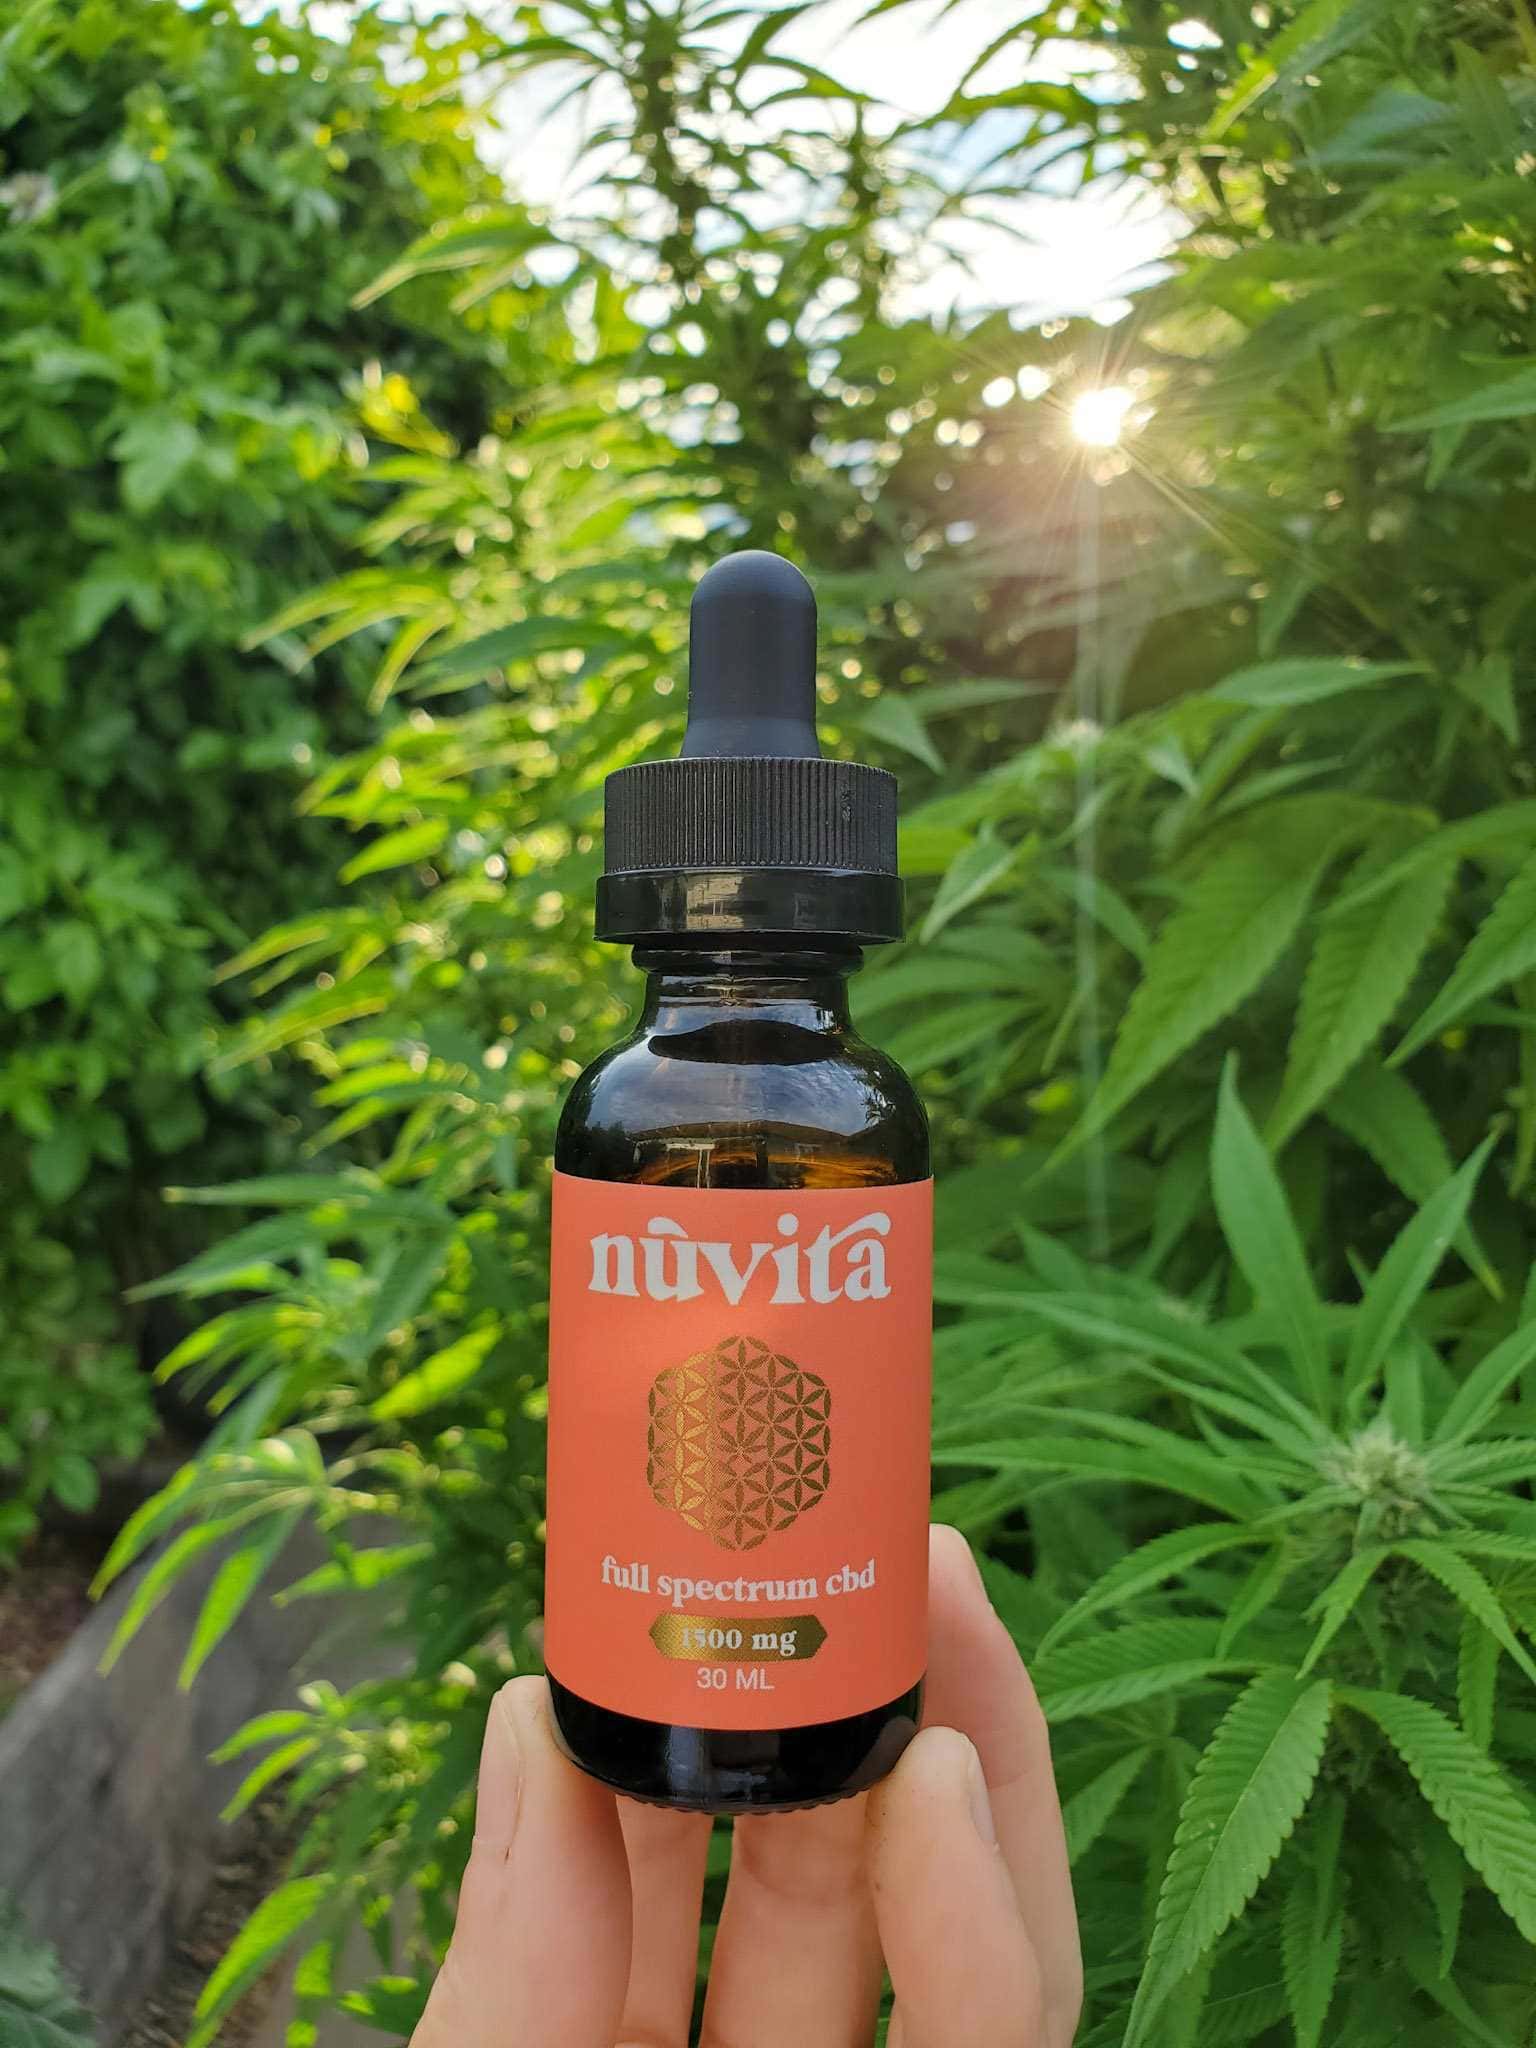 DeannaCat is holding a dropper bottle of full spectrum CBD by Nuvita. Beyond the dropper bottle is a cannabis plant in the early stages of flowering. The sun is shining in through one of the branches in the background creating rays of sun emanating from its center. 